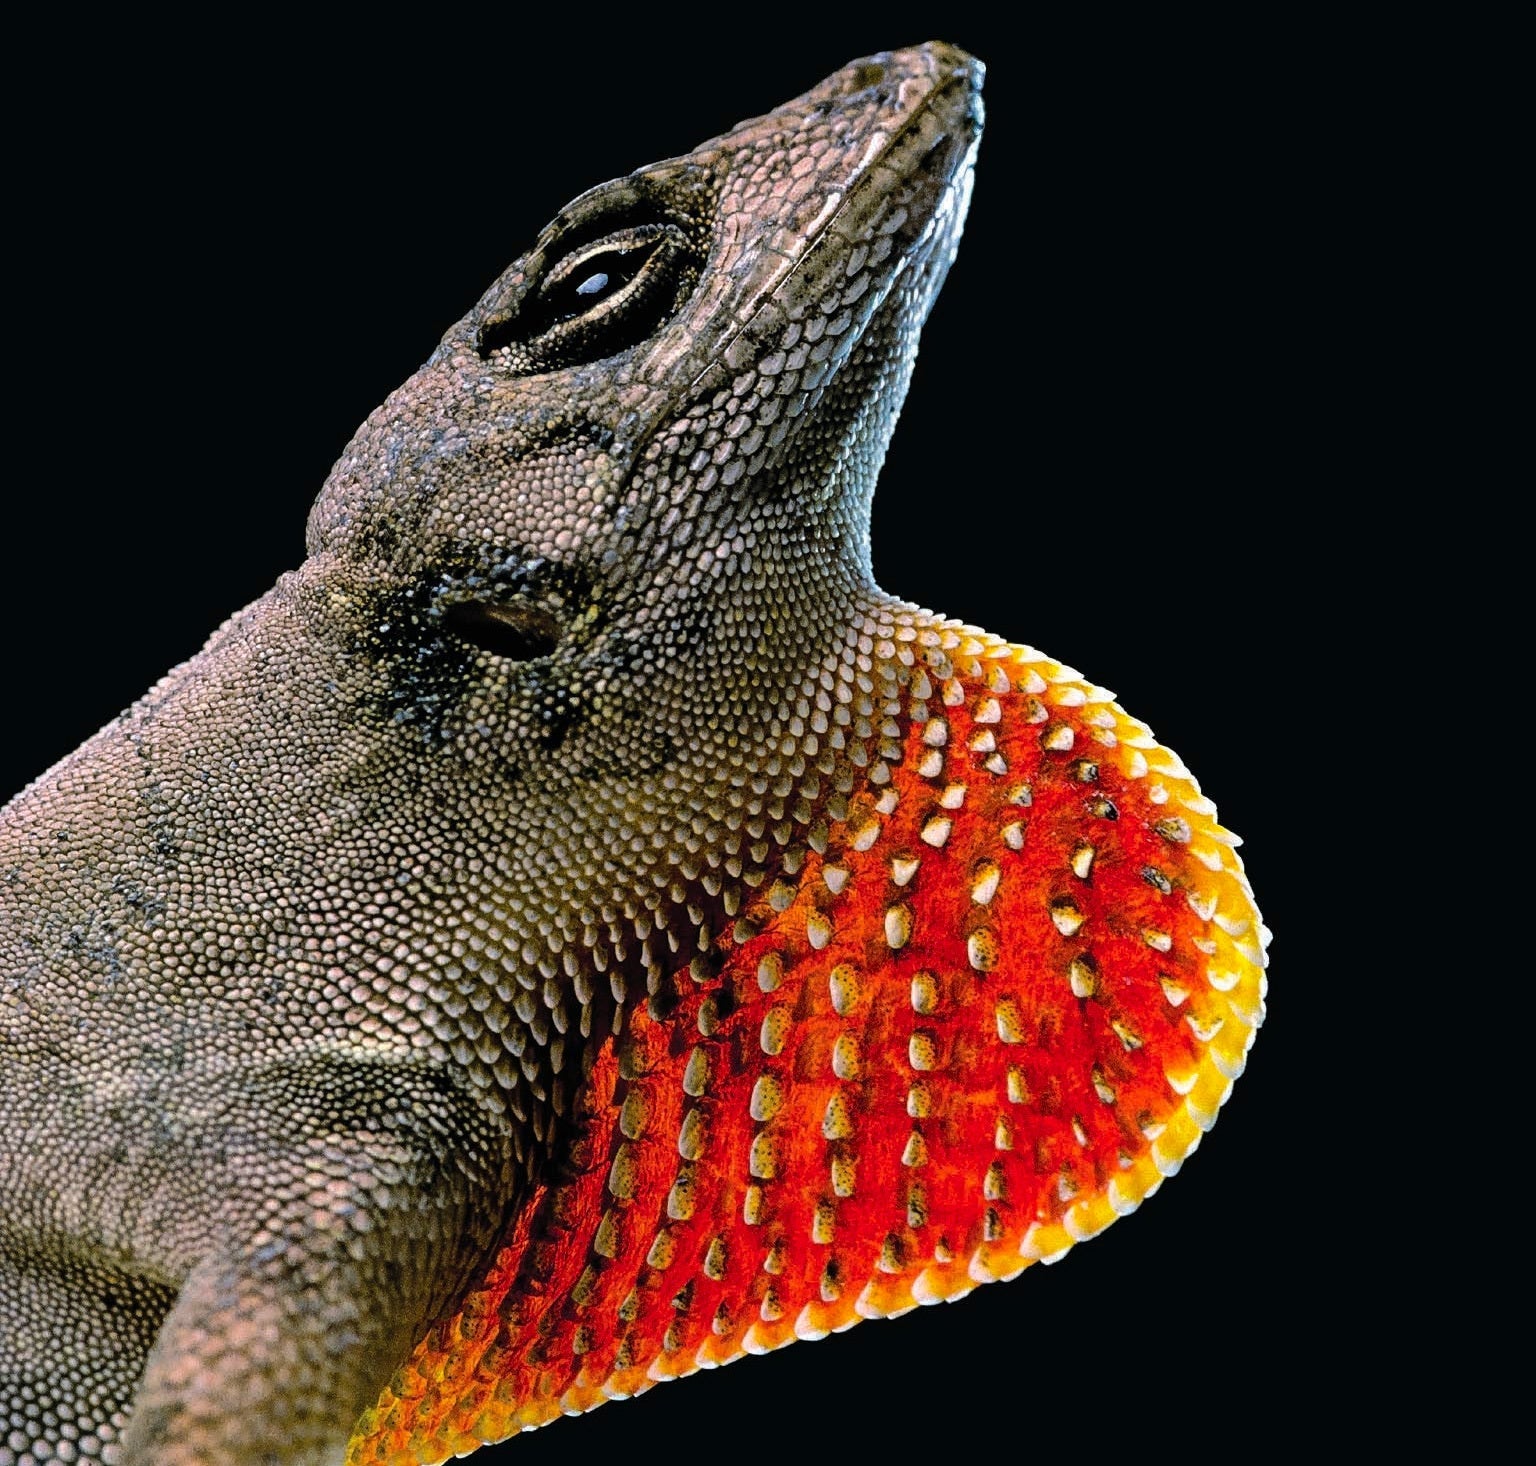 A close-up photo of a brown Anolis with red throat shown against a black background.